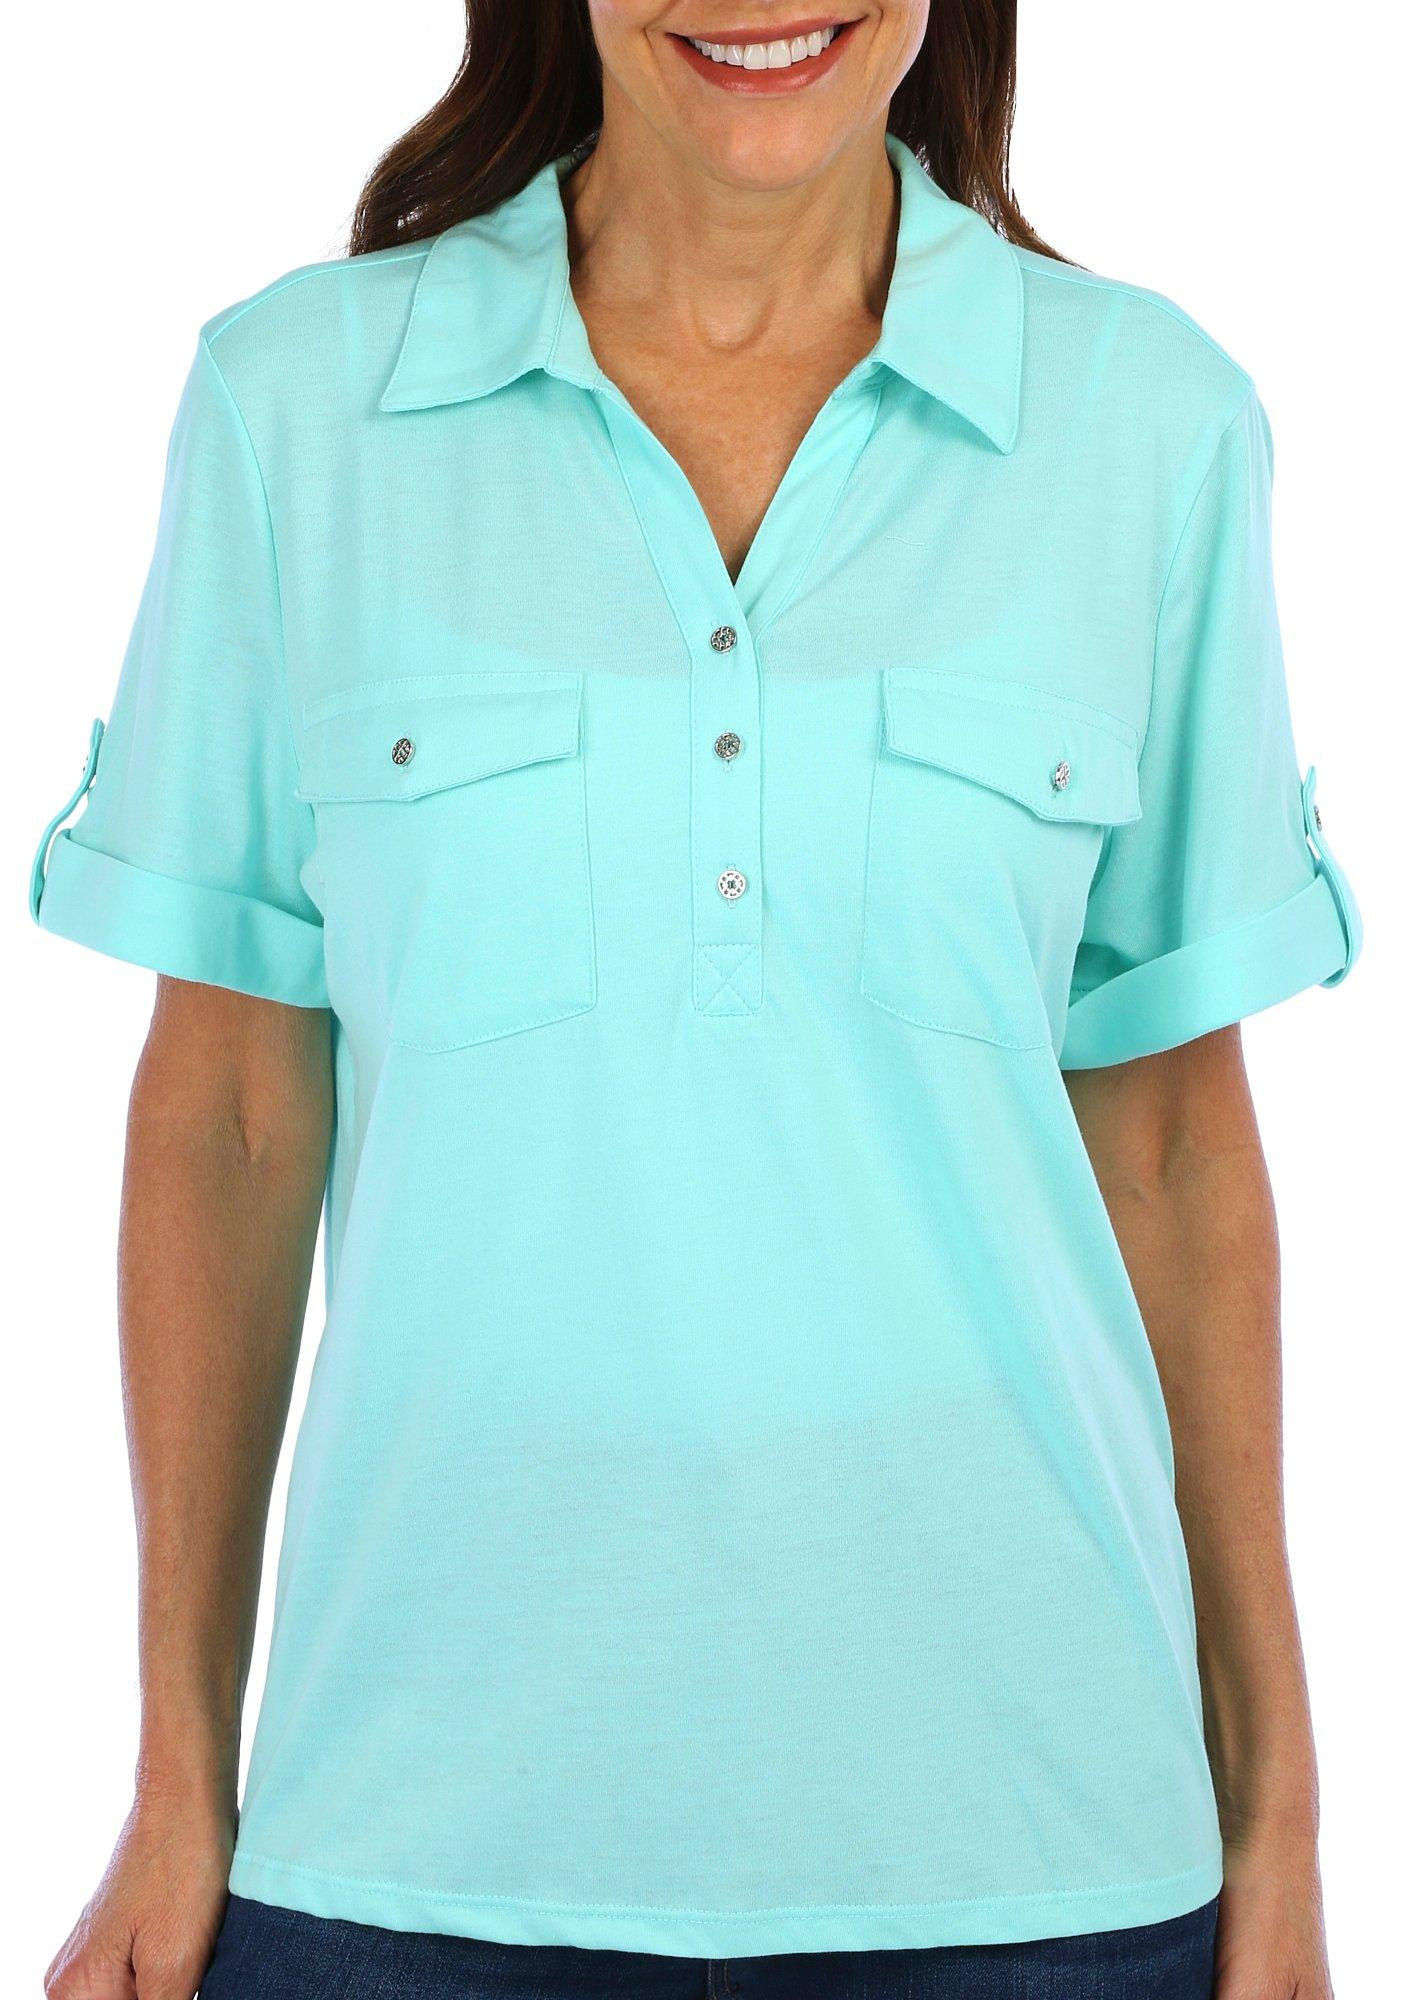 Coral Bay Petite Solid Roll Tab Short Sleeve Jersey Polo